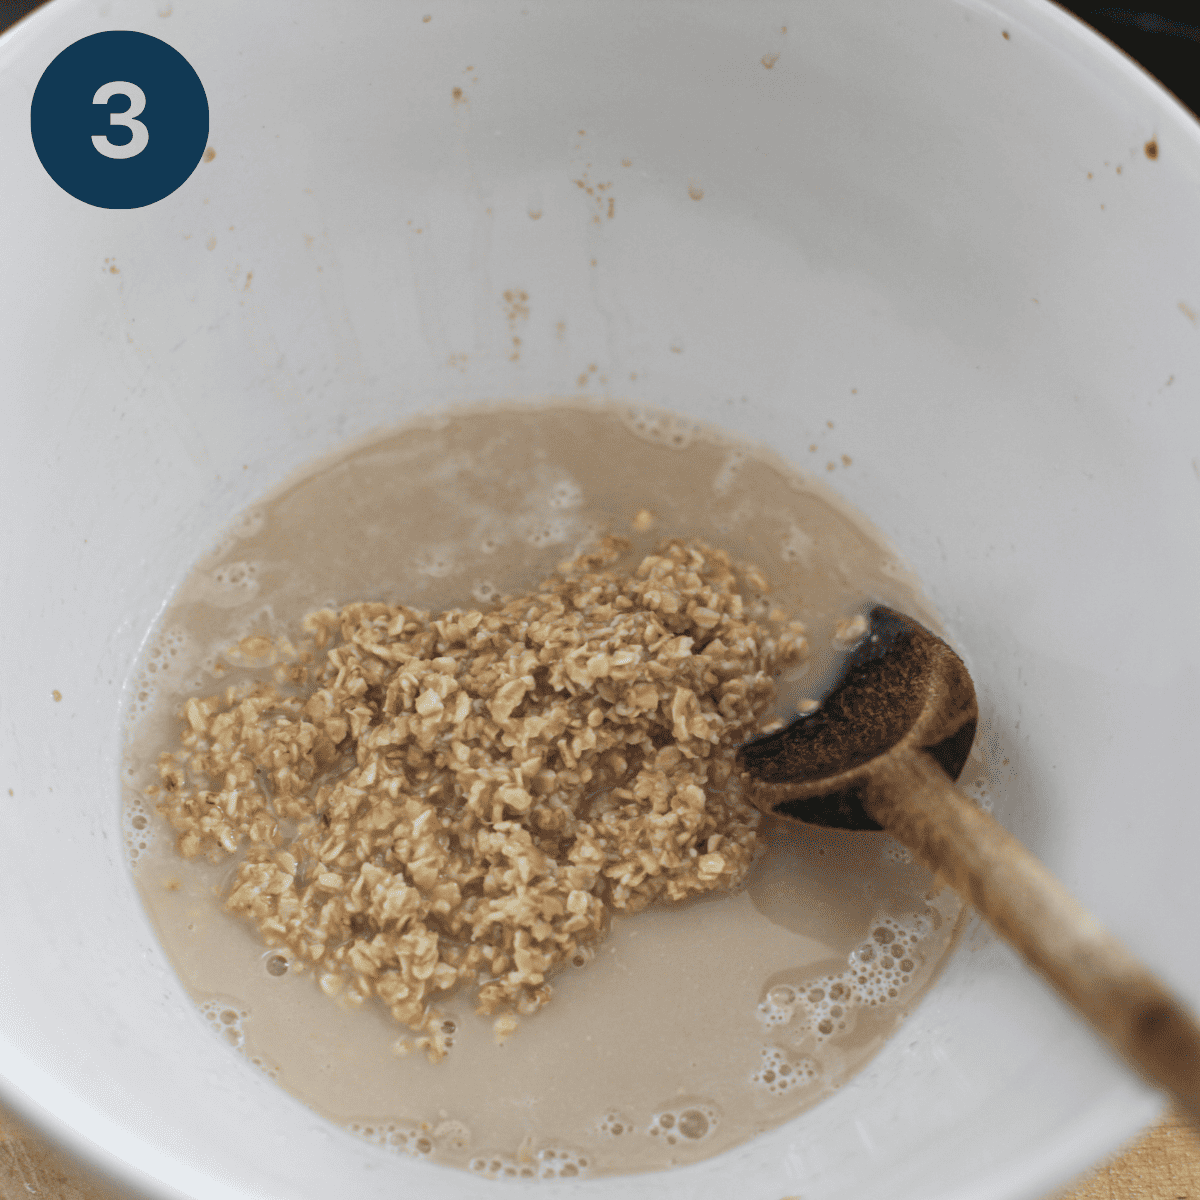 Adding the yeast to the oatmeal.